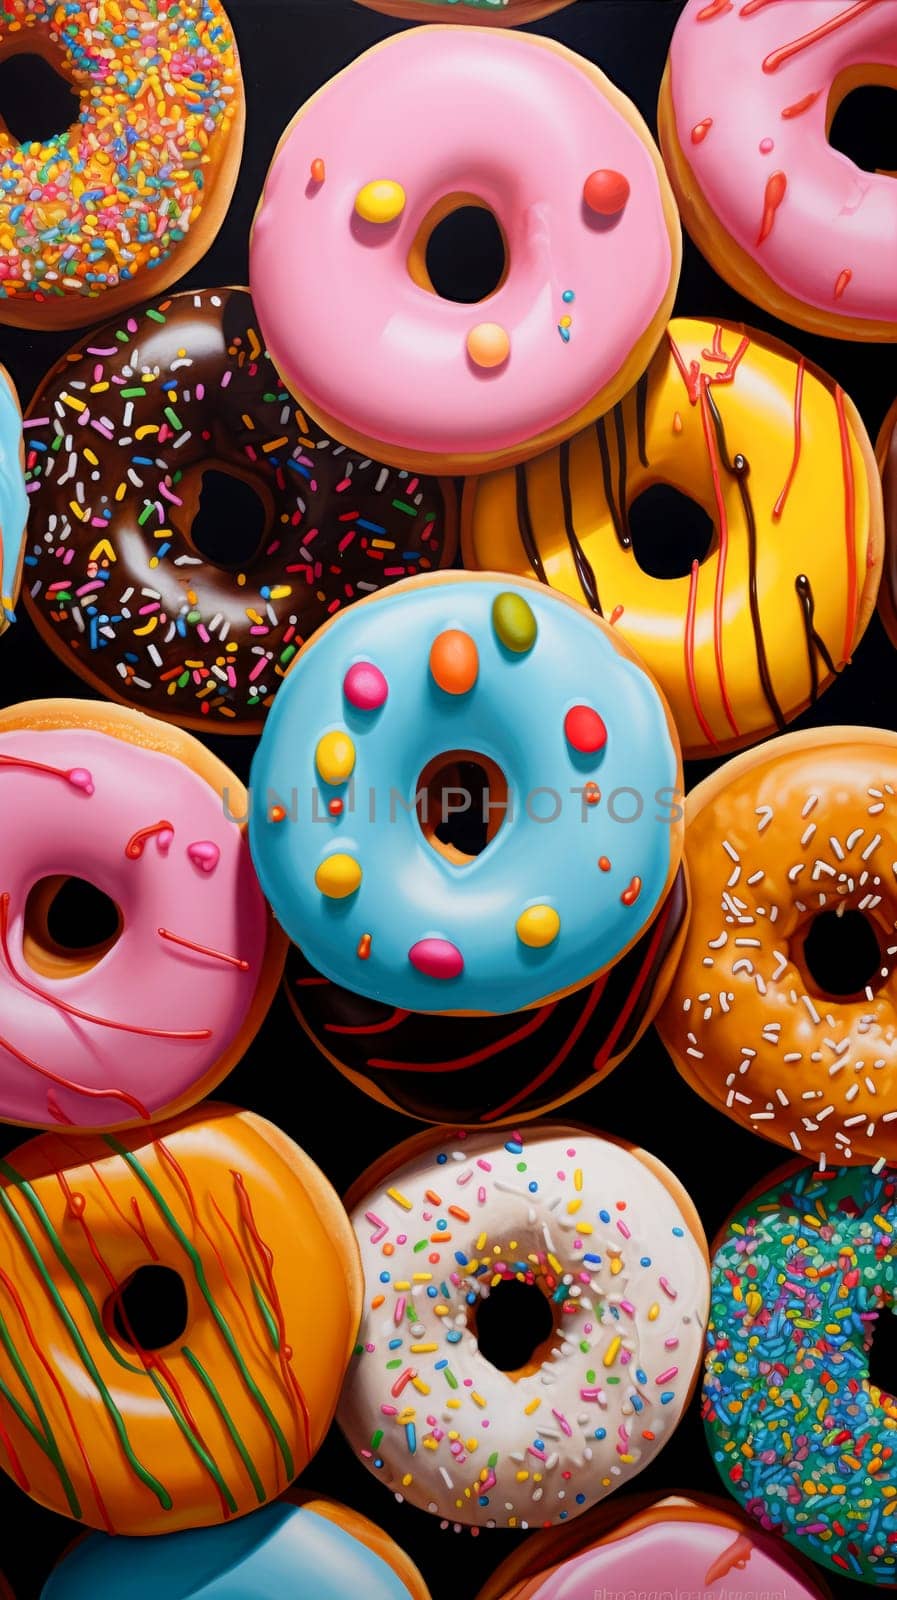 Donuts pattern. Top view of a variety of glazed donuts. Colorful glazed donuts with sprinkles by Ramanouskaya